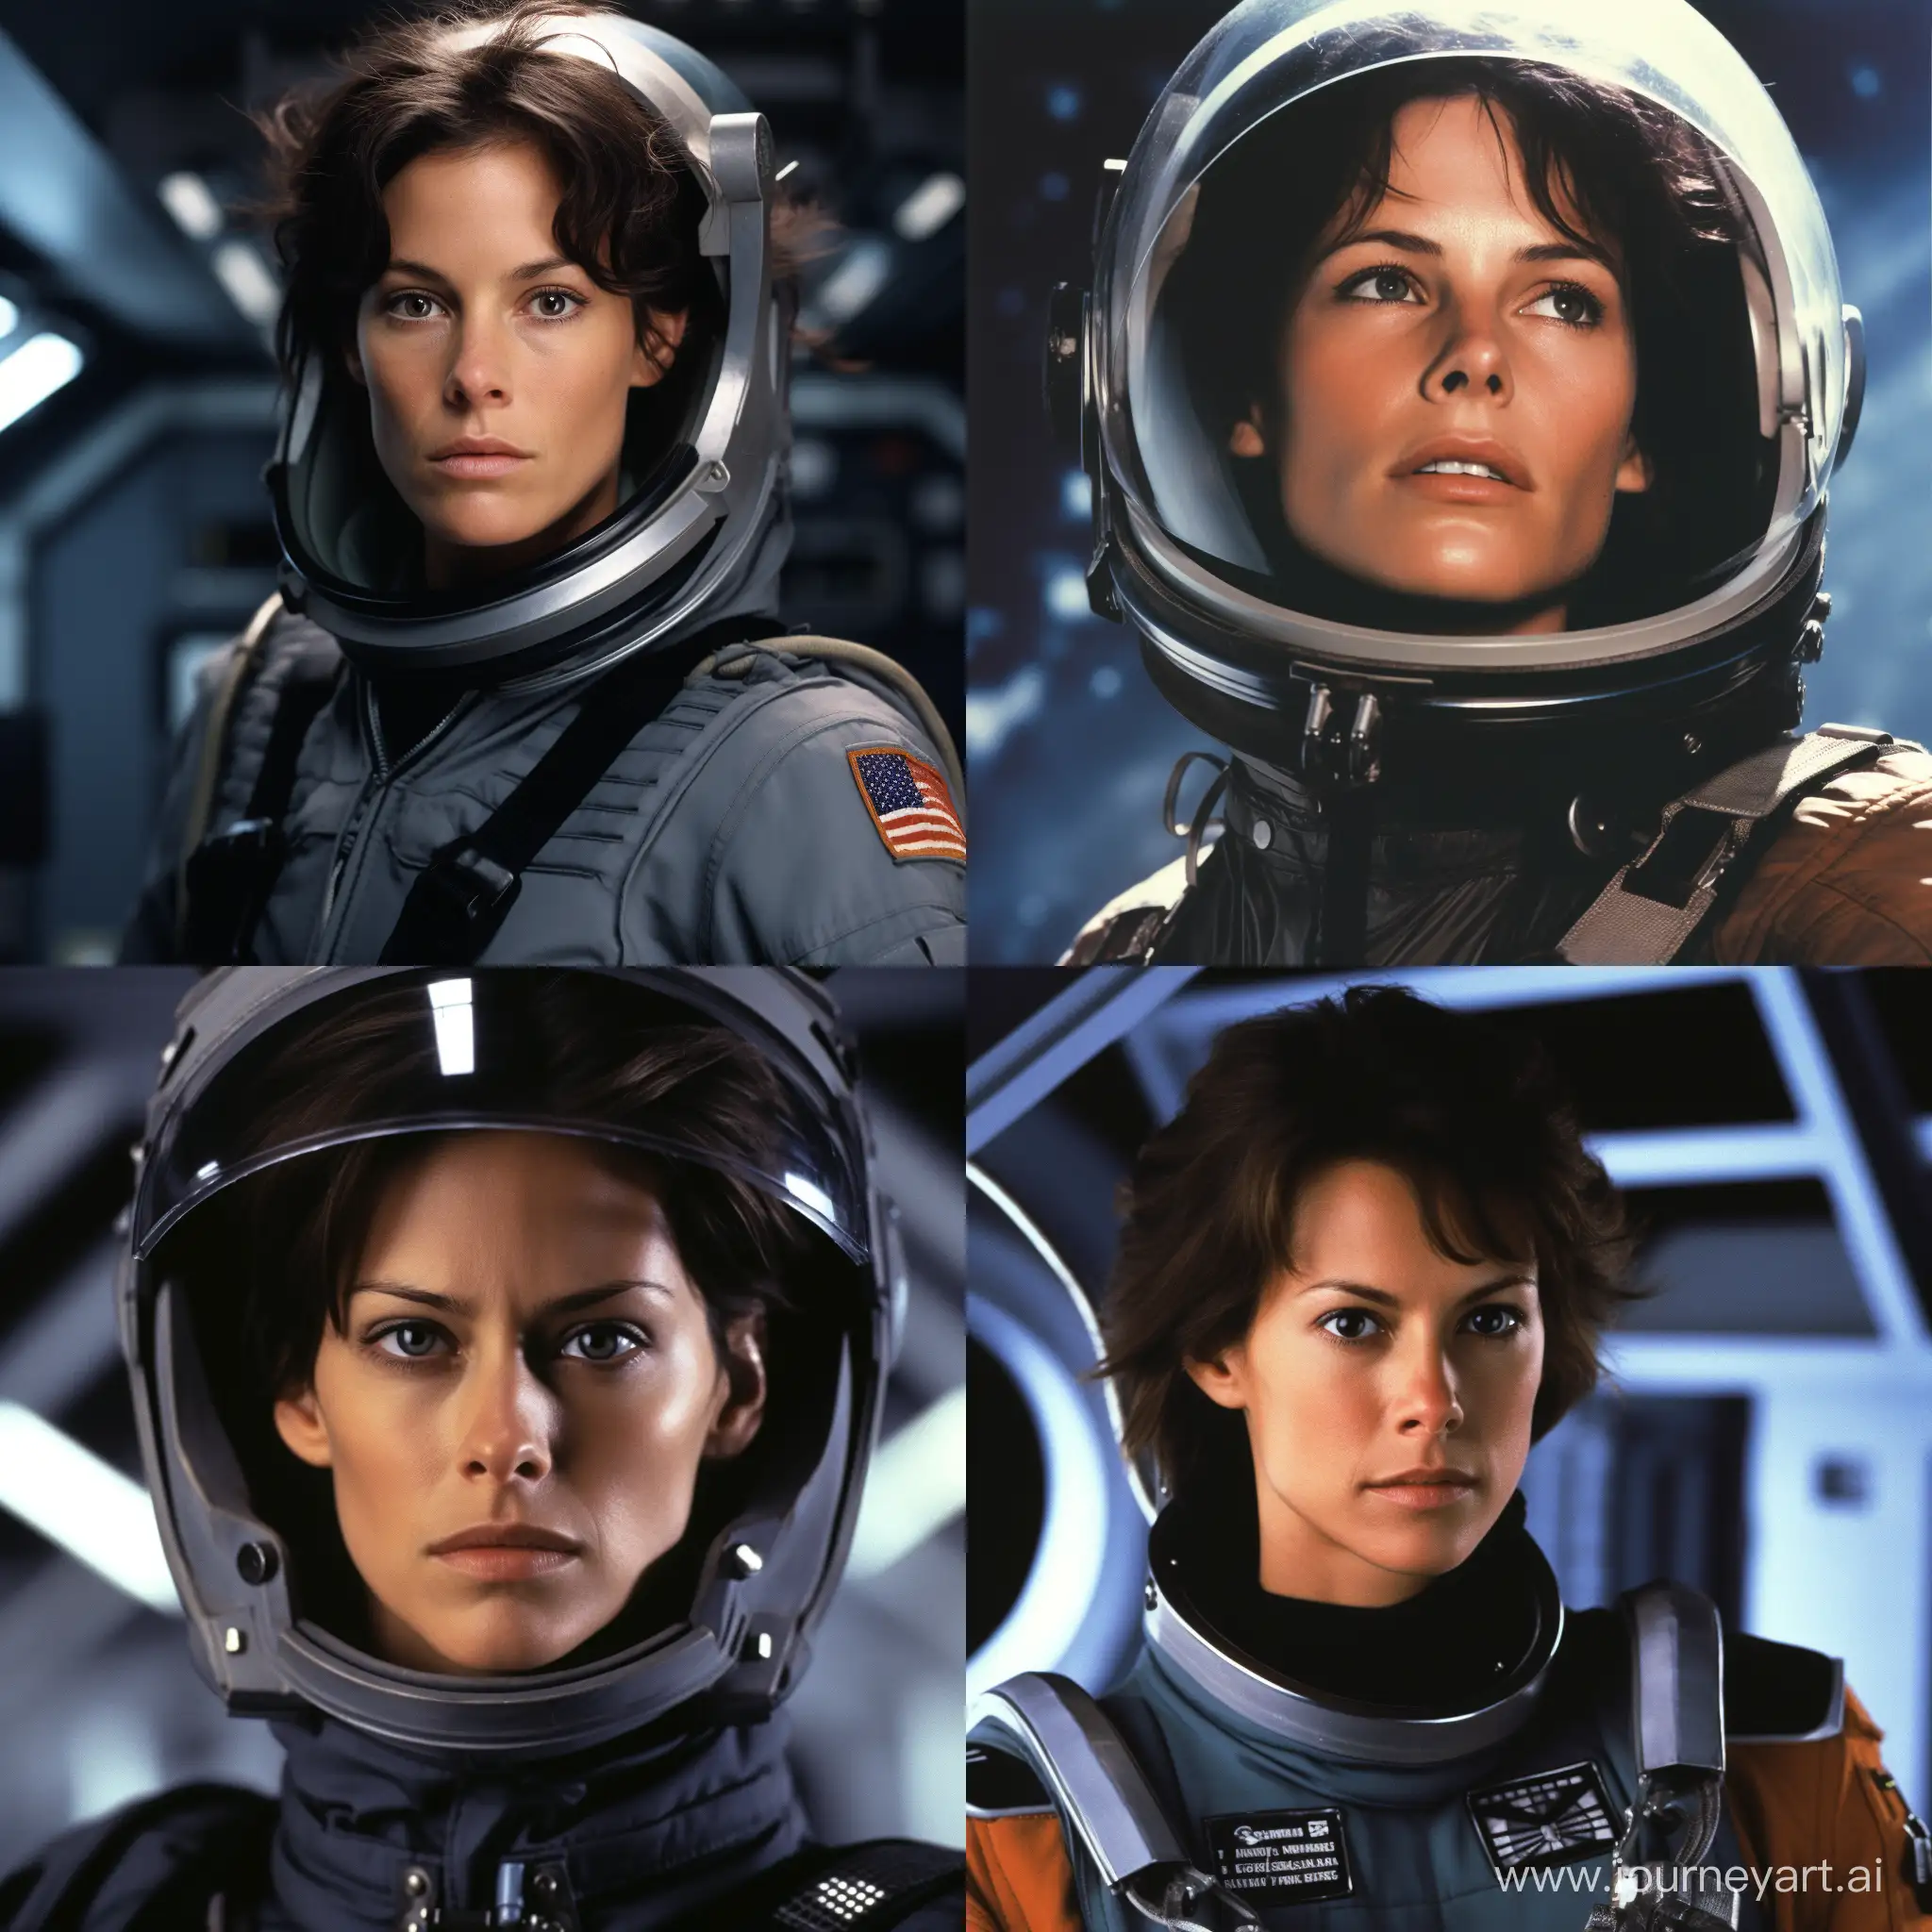 Medium shot, Jamie Lee Curtis, age 25,  long dark hair, alluring space uniform.  Trapped in a spaceship laboratory with an alien xenomorph.  Horror, action, glossy, exciting.  Ridley Scott Alien film.  Style of Greg Rucka, Ted McKeever.